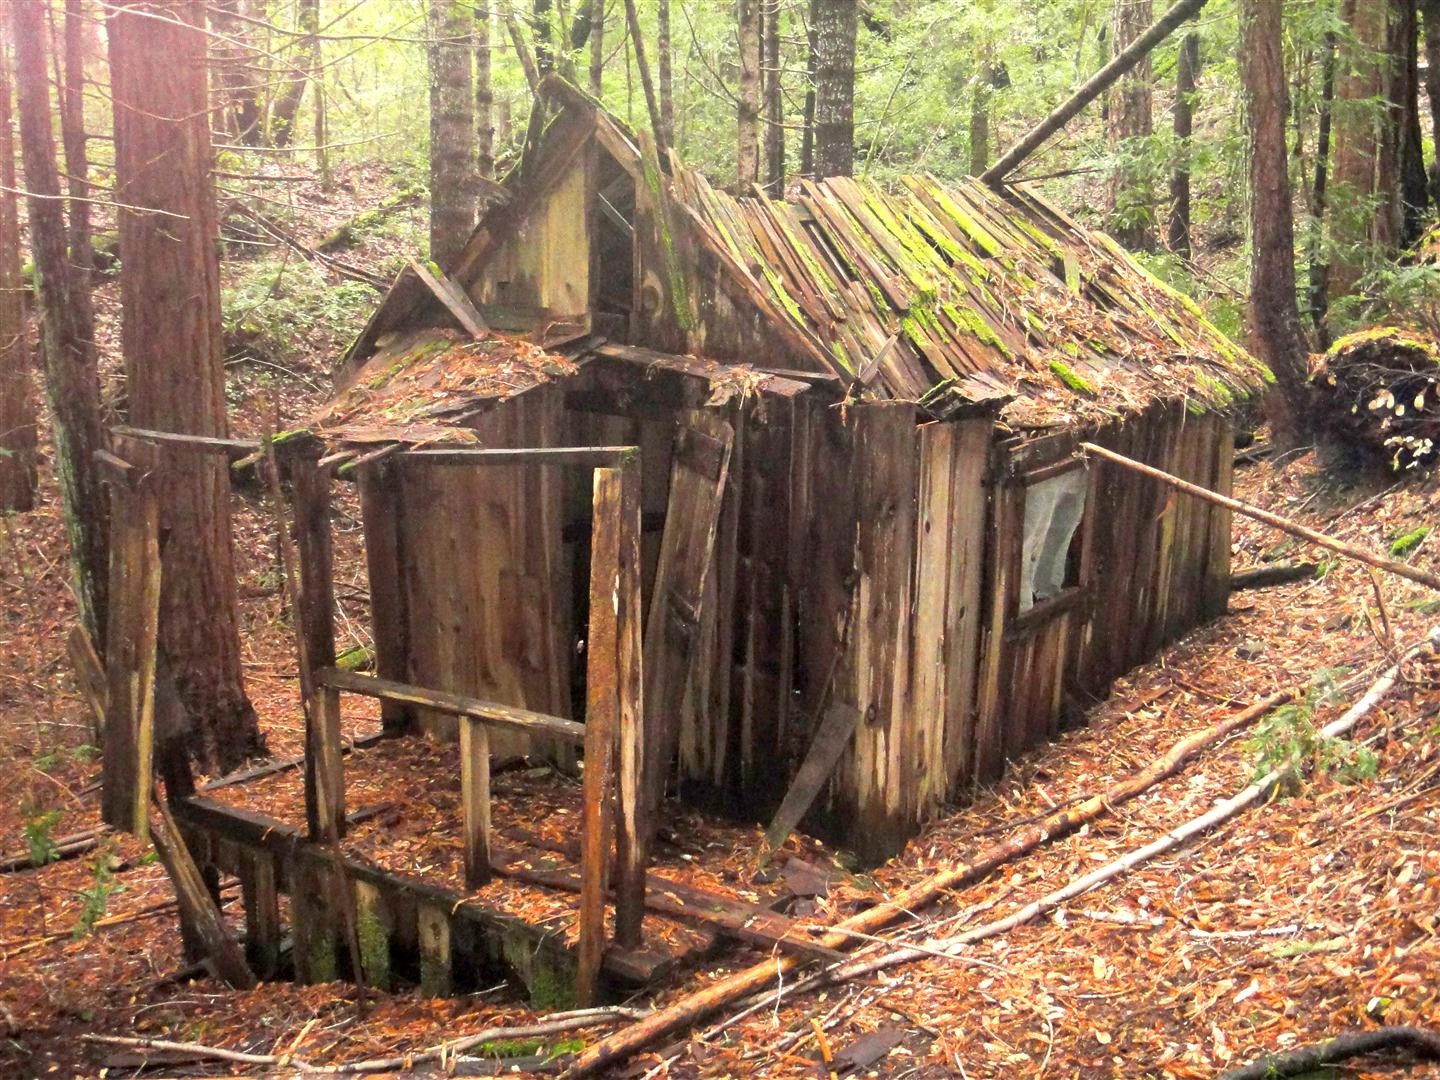 Remains of cabin at Johnson Camp - PHOTO BY BARRY EVANS